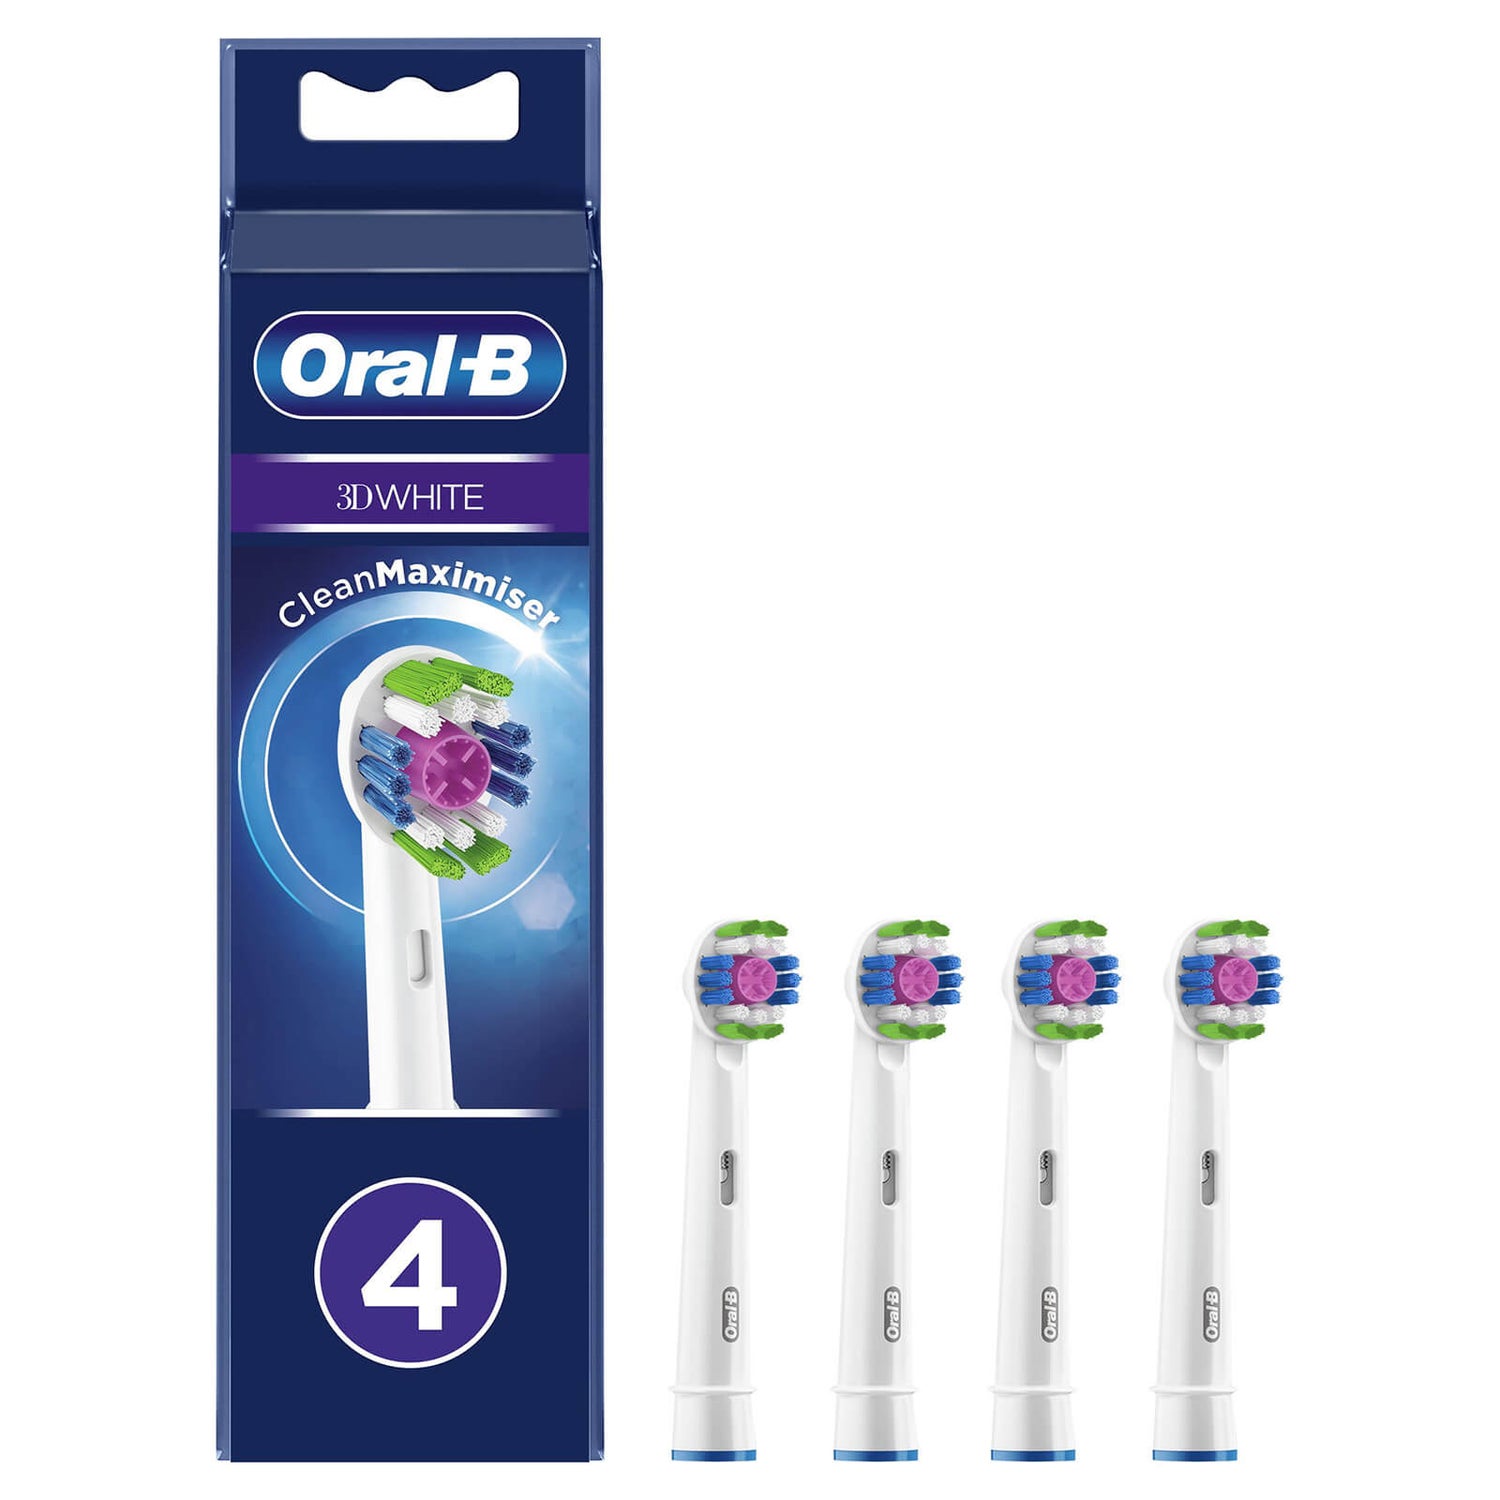 Oral-B 3D White Toothbrush Head with CleanMaximiser Technology, Pack of 4 Counts